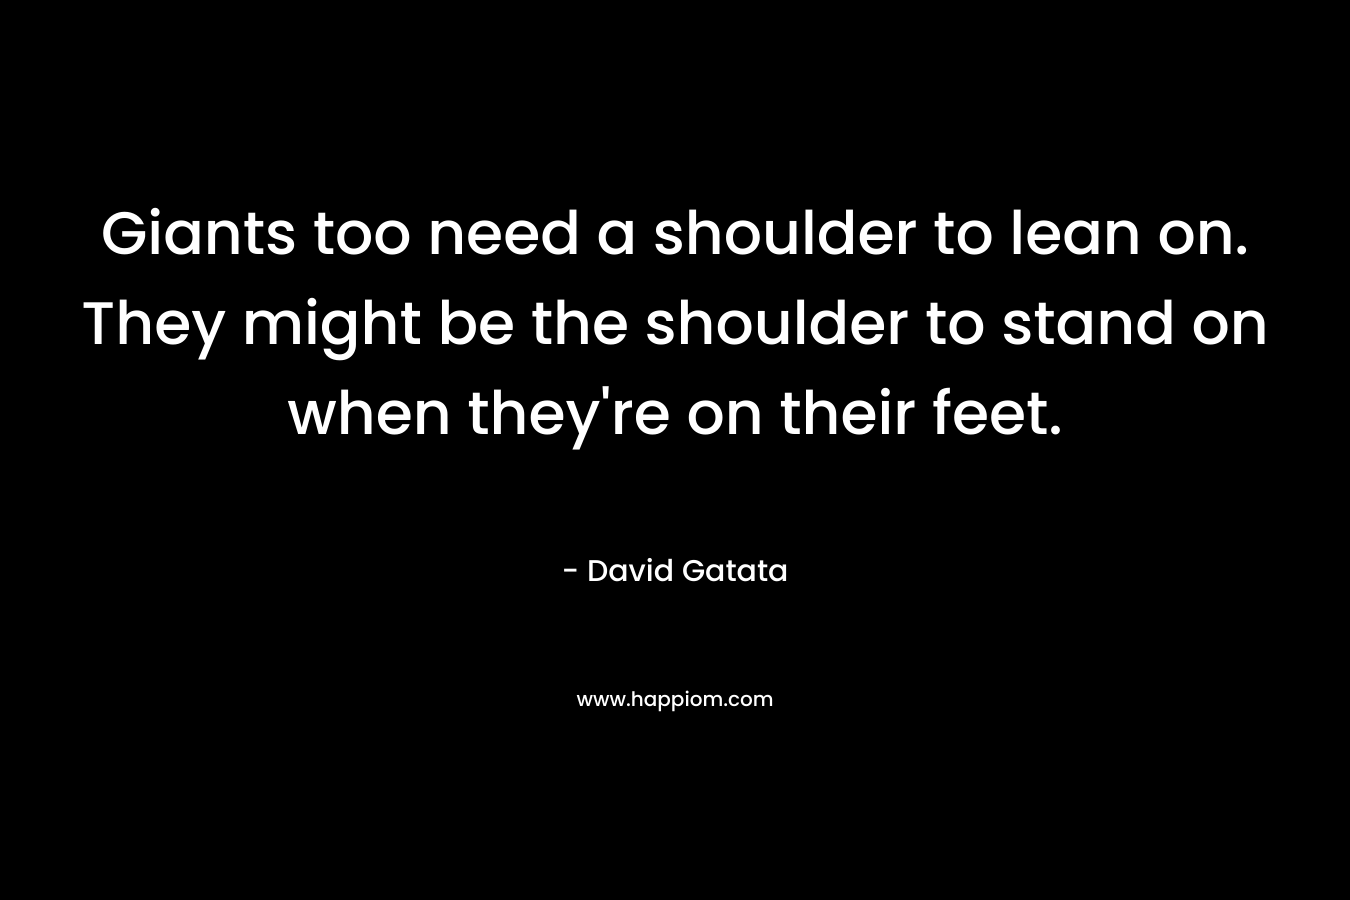 Giants too need a shoulder to lean on. They might be the shoulder to stand on when they’re on their feet. – David Gatata